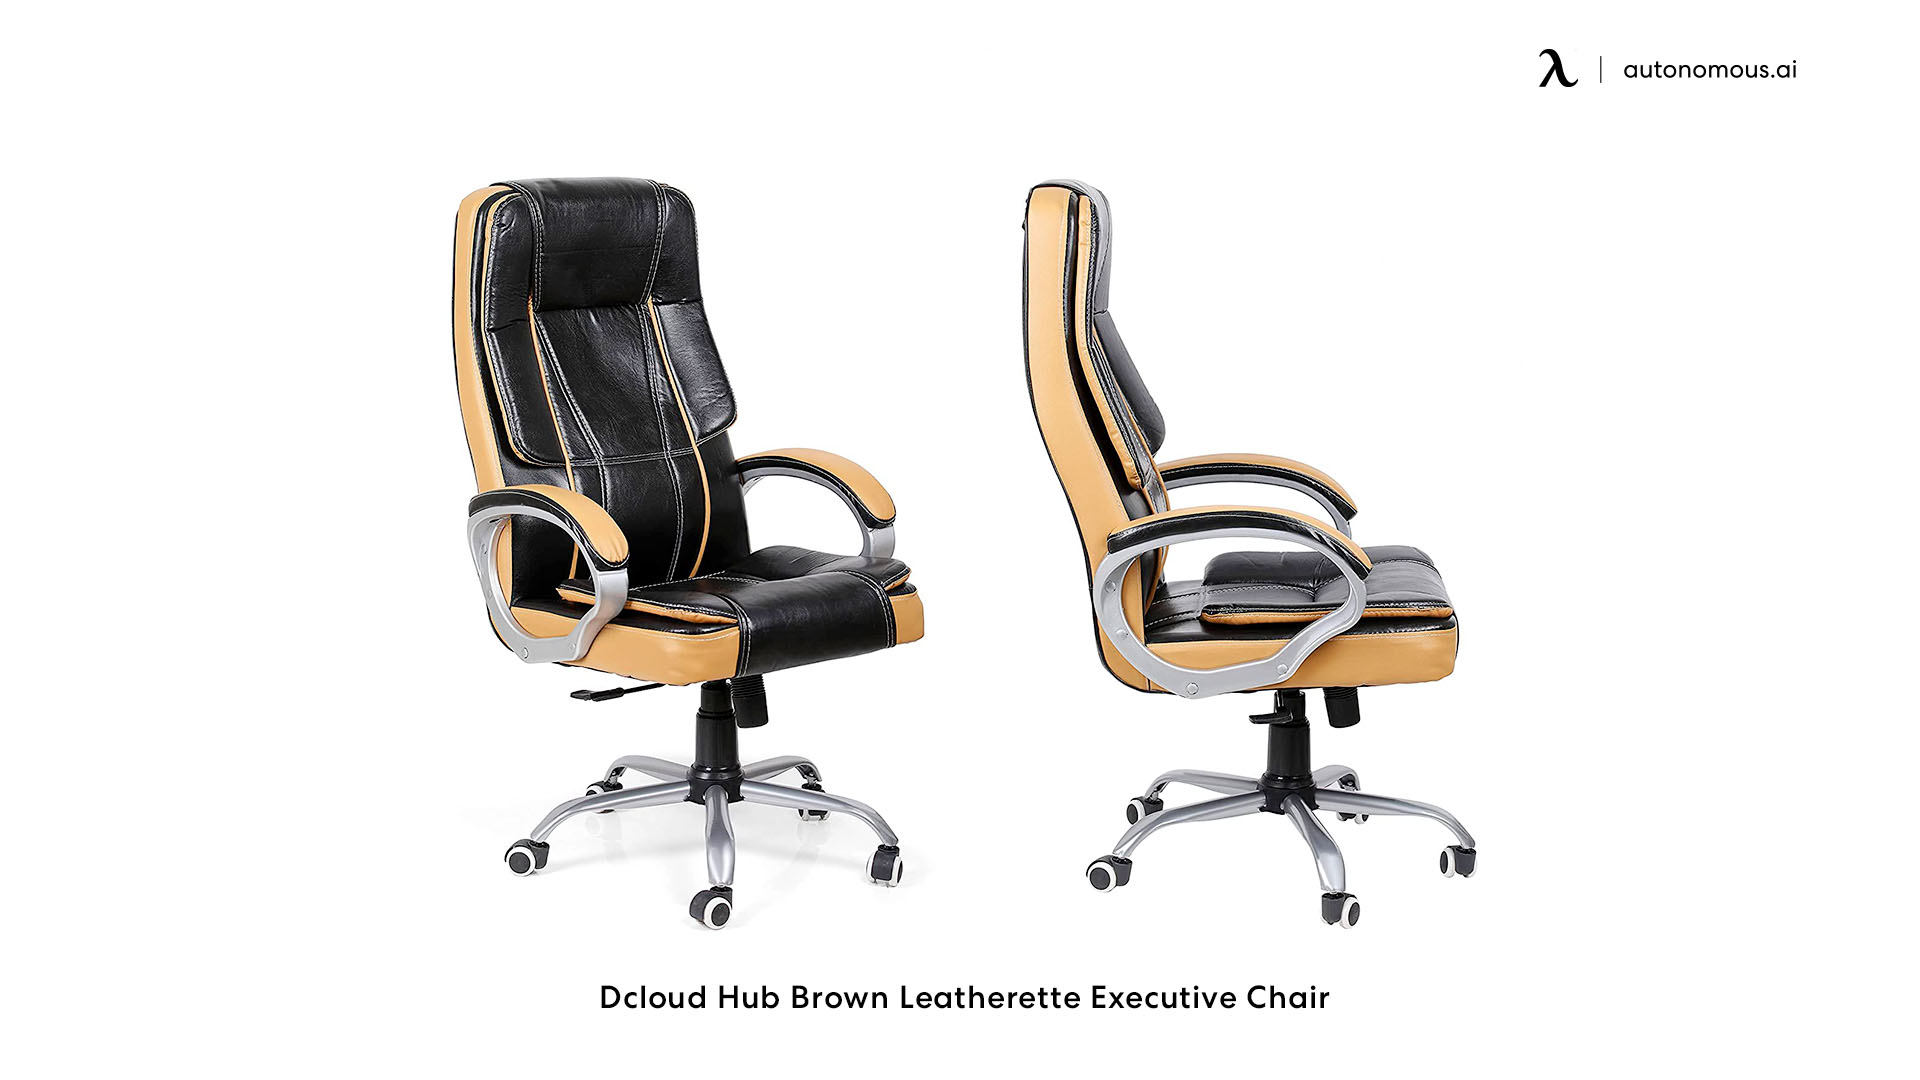 Dcloud Hub Brown Leatherette Executive chair